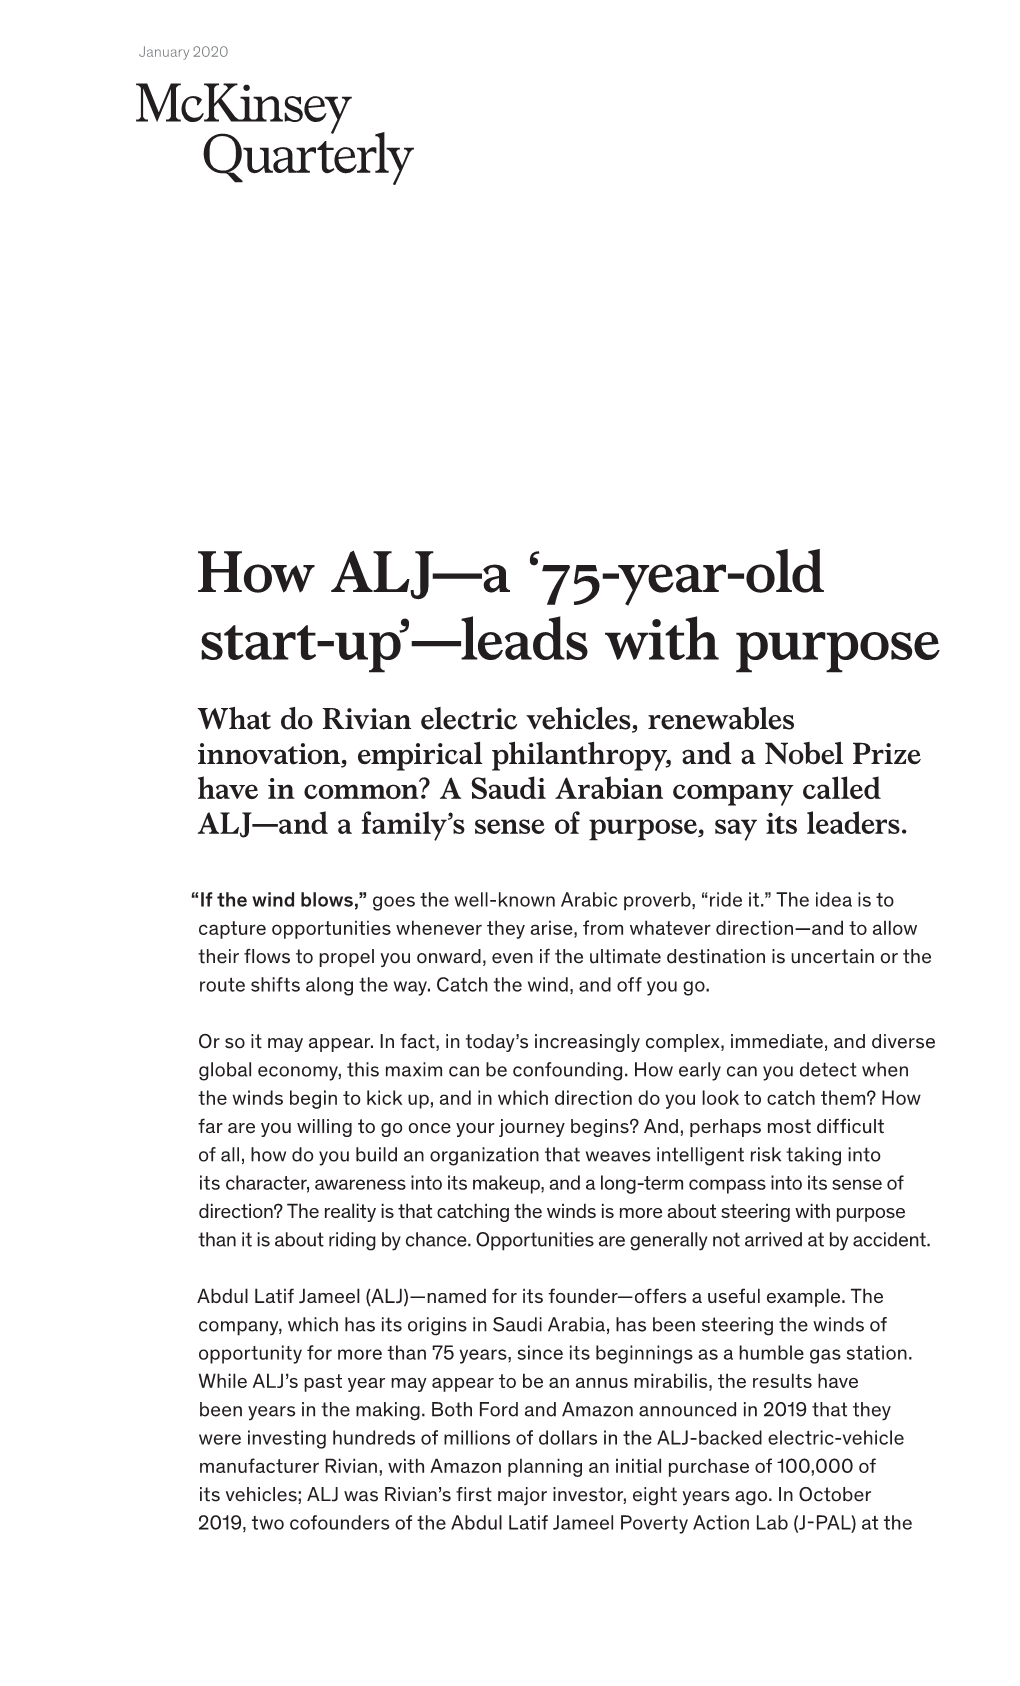 How ALJ—A '75-Year-Old Start-Up'—Leads with Purpose